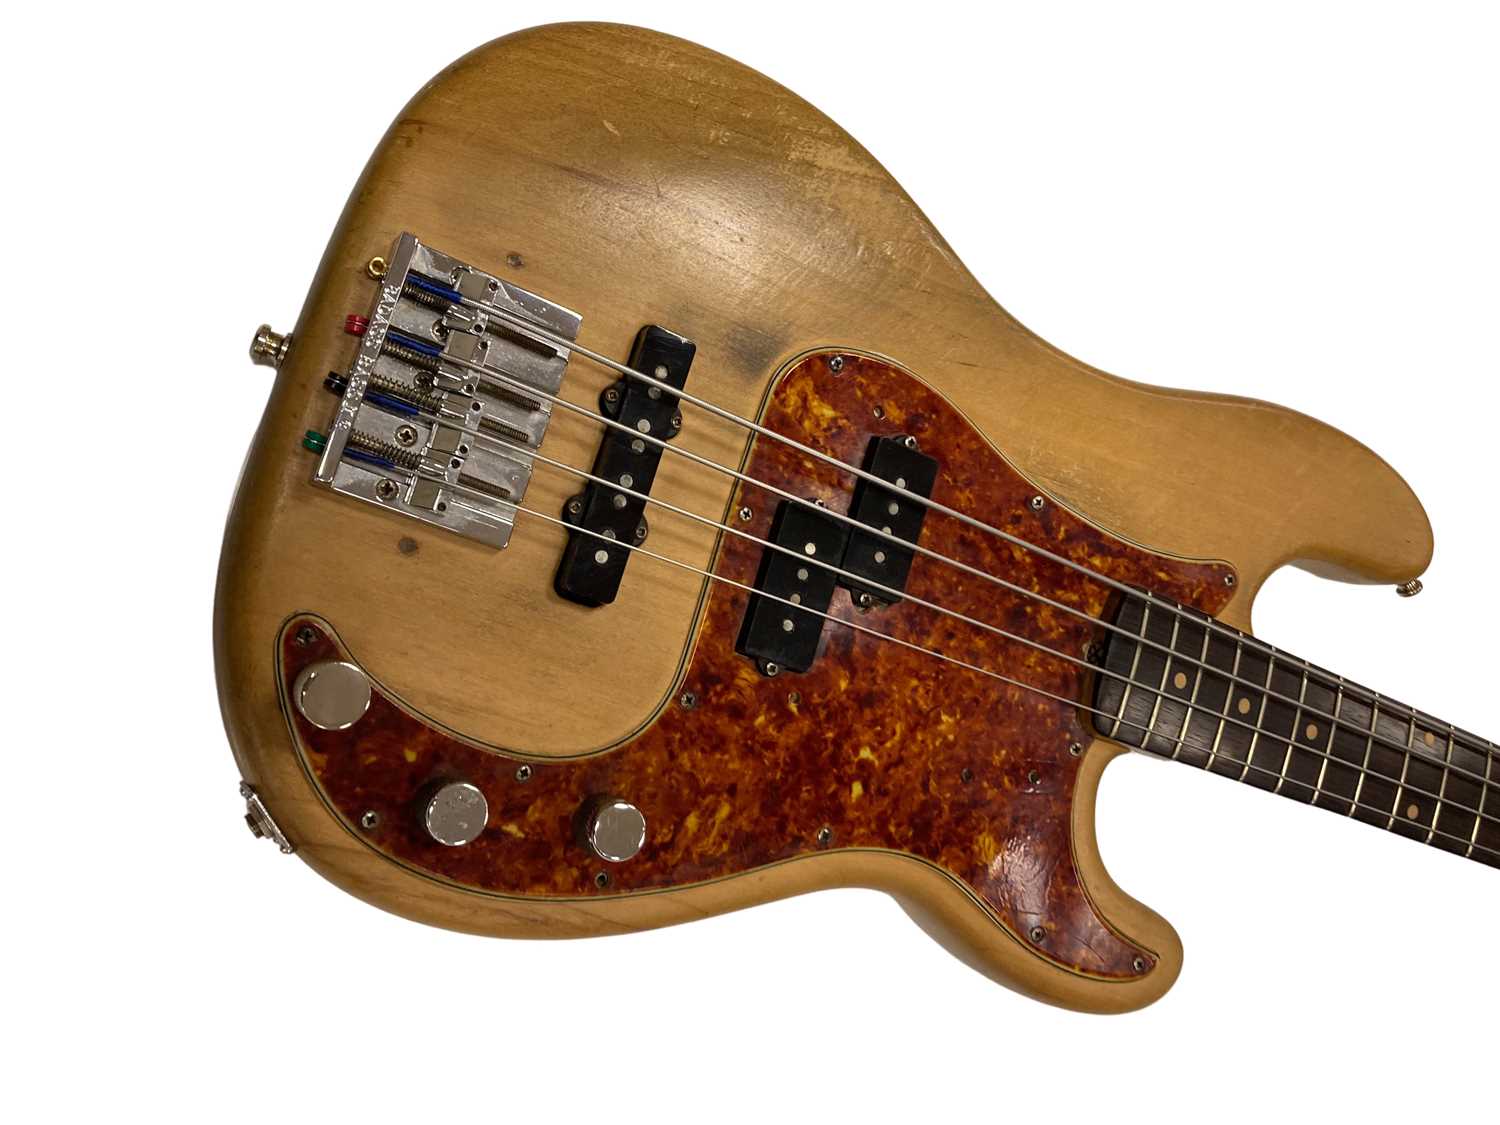 Lot 462 - 1960 FENDER PRECISION BASS USED BY COLIN GREENWOOD OF RADIOHEAD WHEN RECORDING FAKE PLASTIC TREES